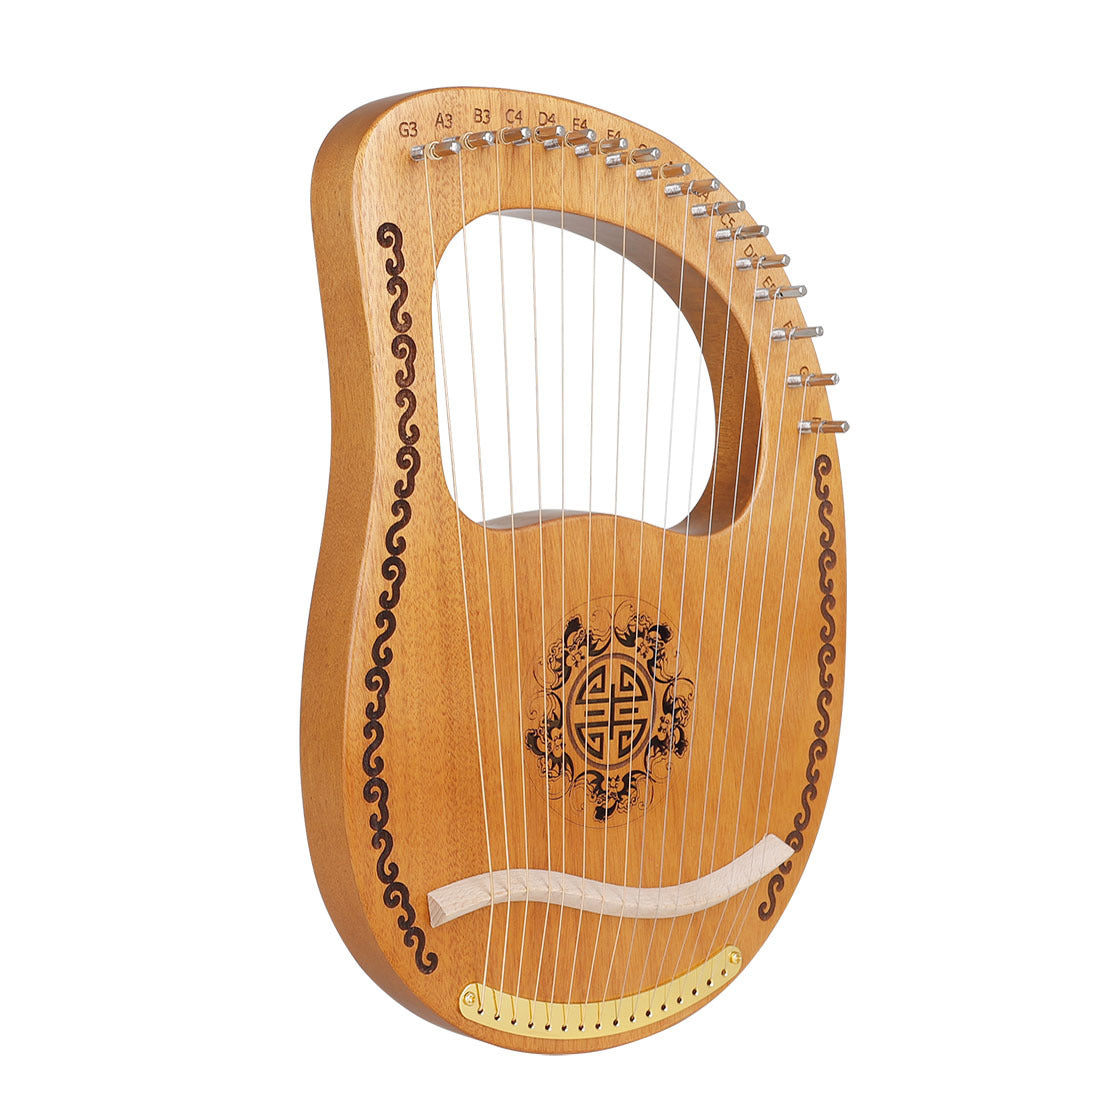 Small Portable Simple and Easy to Learn Harp Musical Instrument